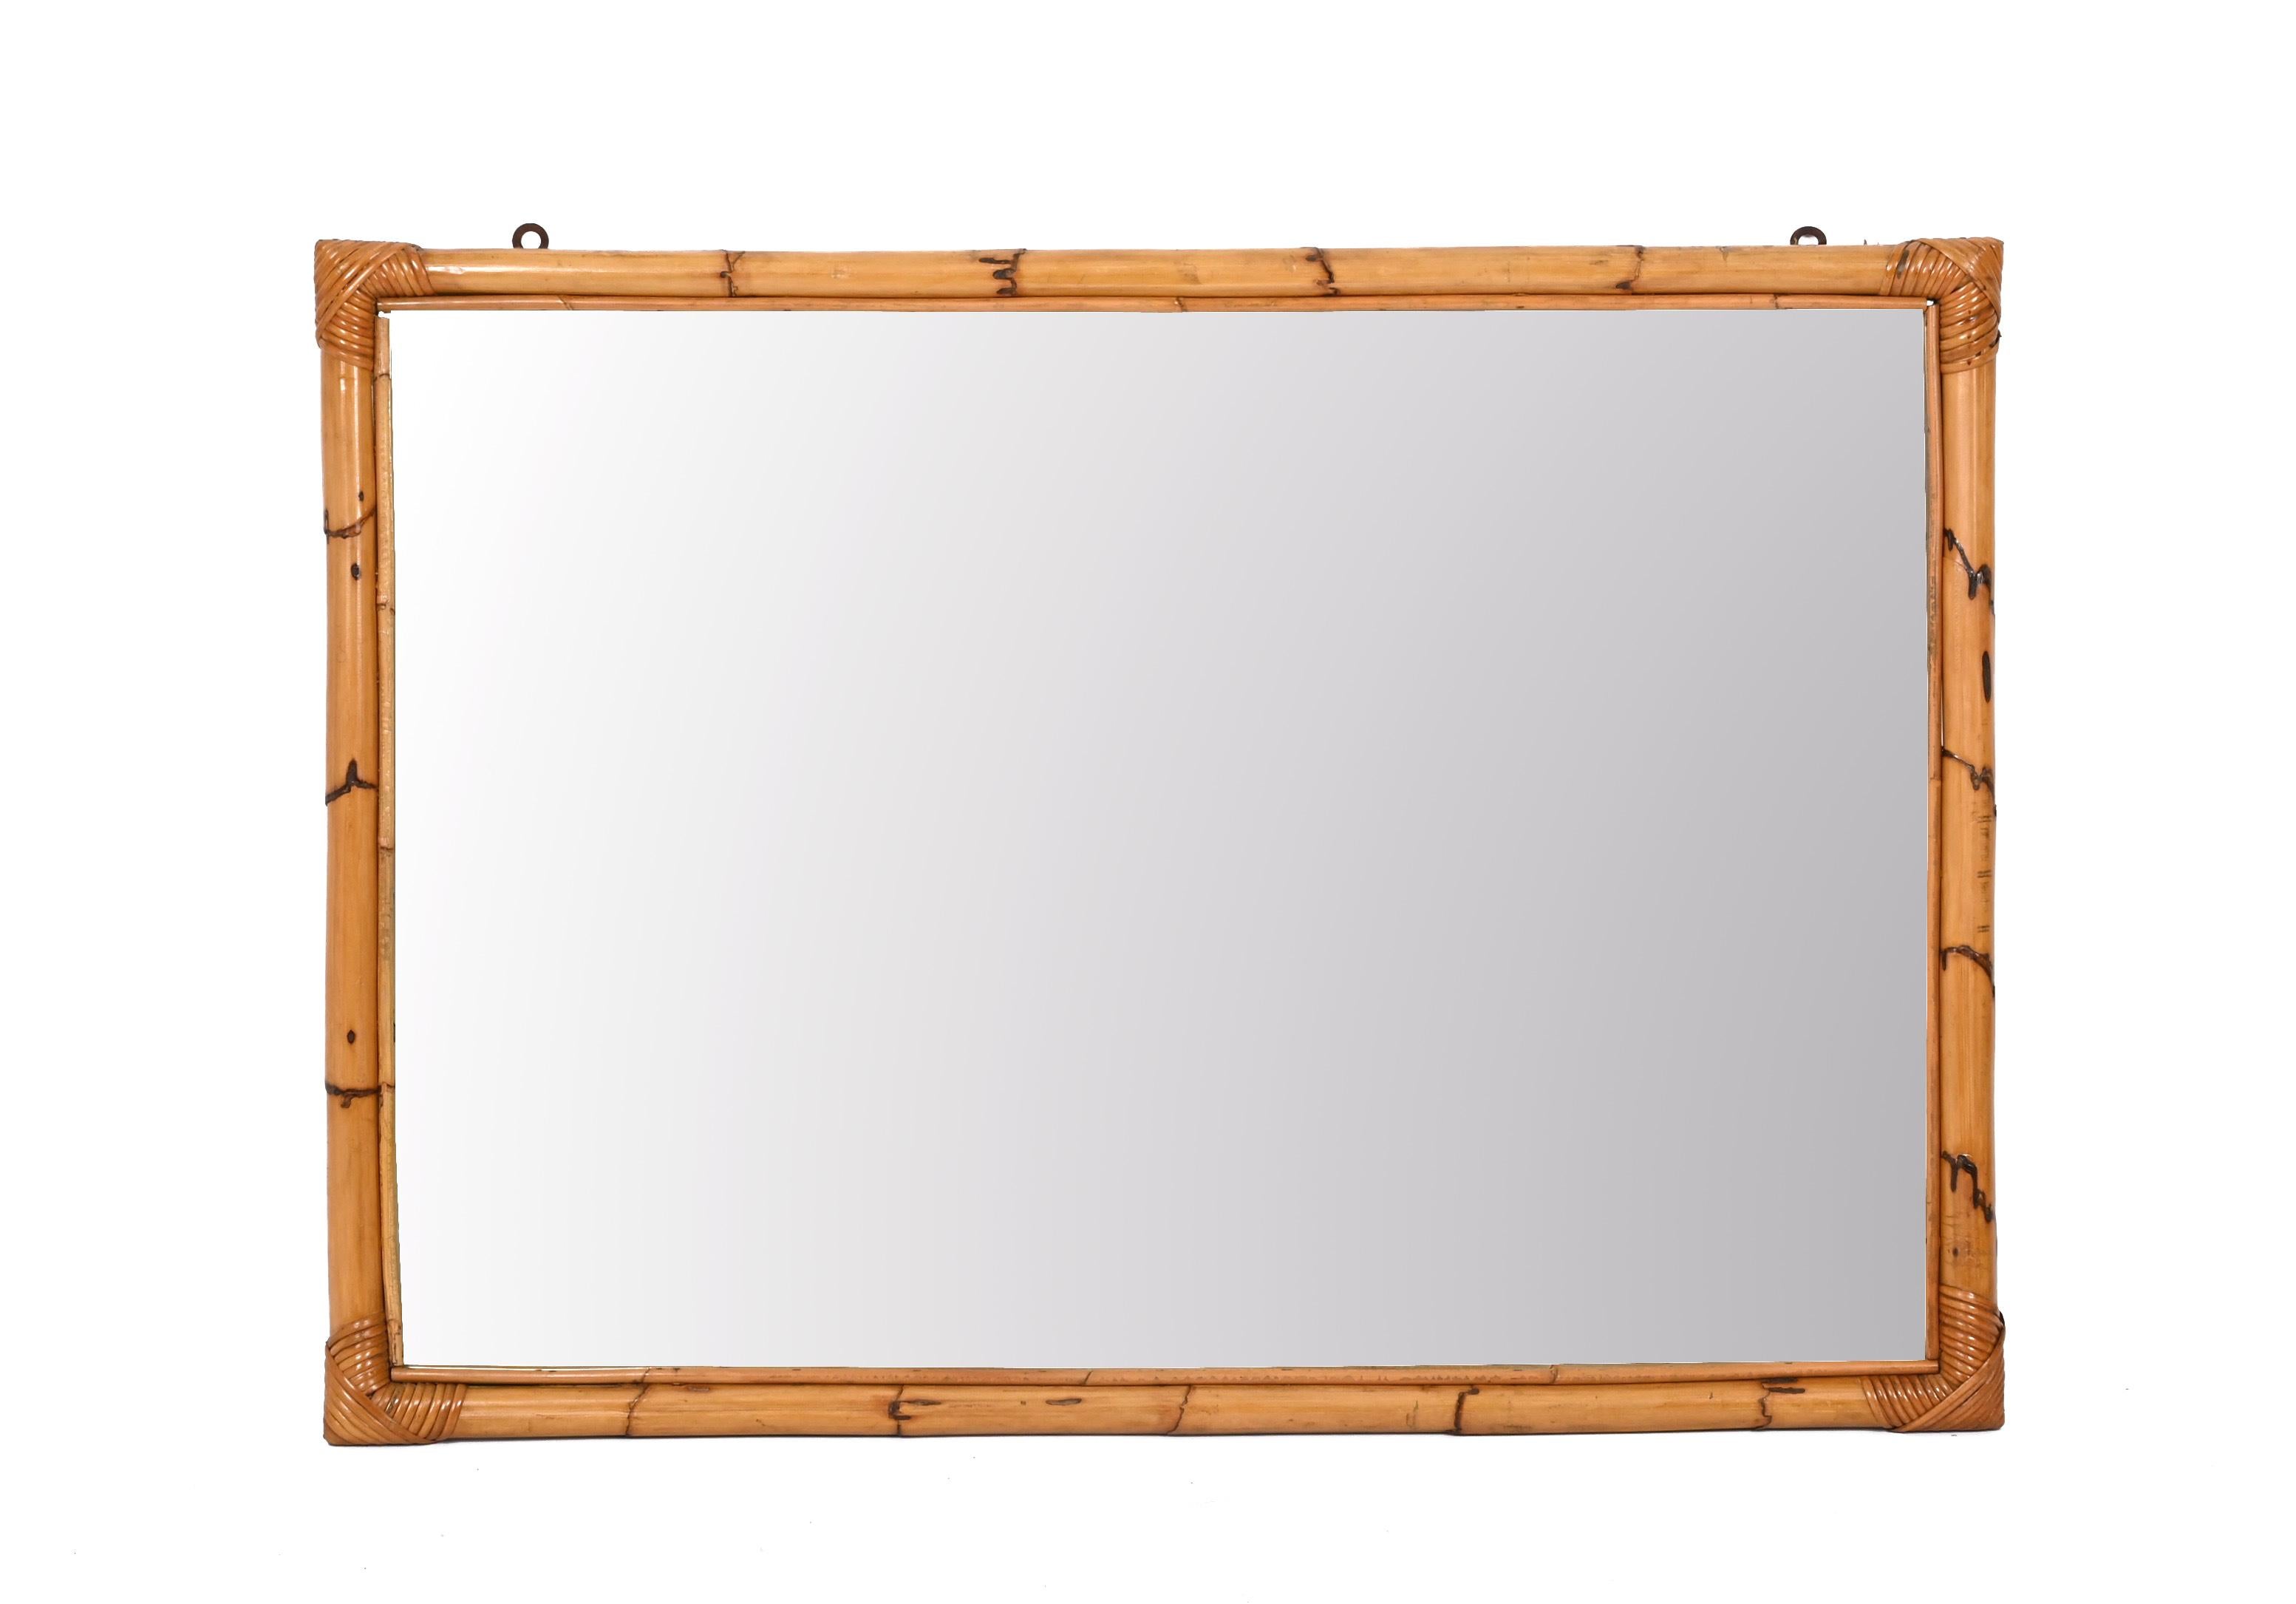 Midcentury Large Rectangular Italian Mirror with Double Bamboo Cane Frame, 1970s For Sale 6